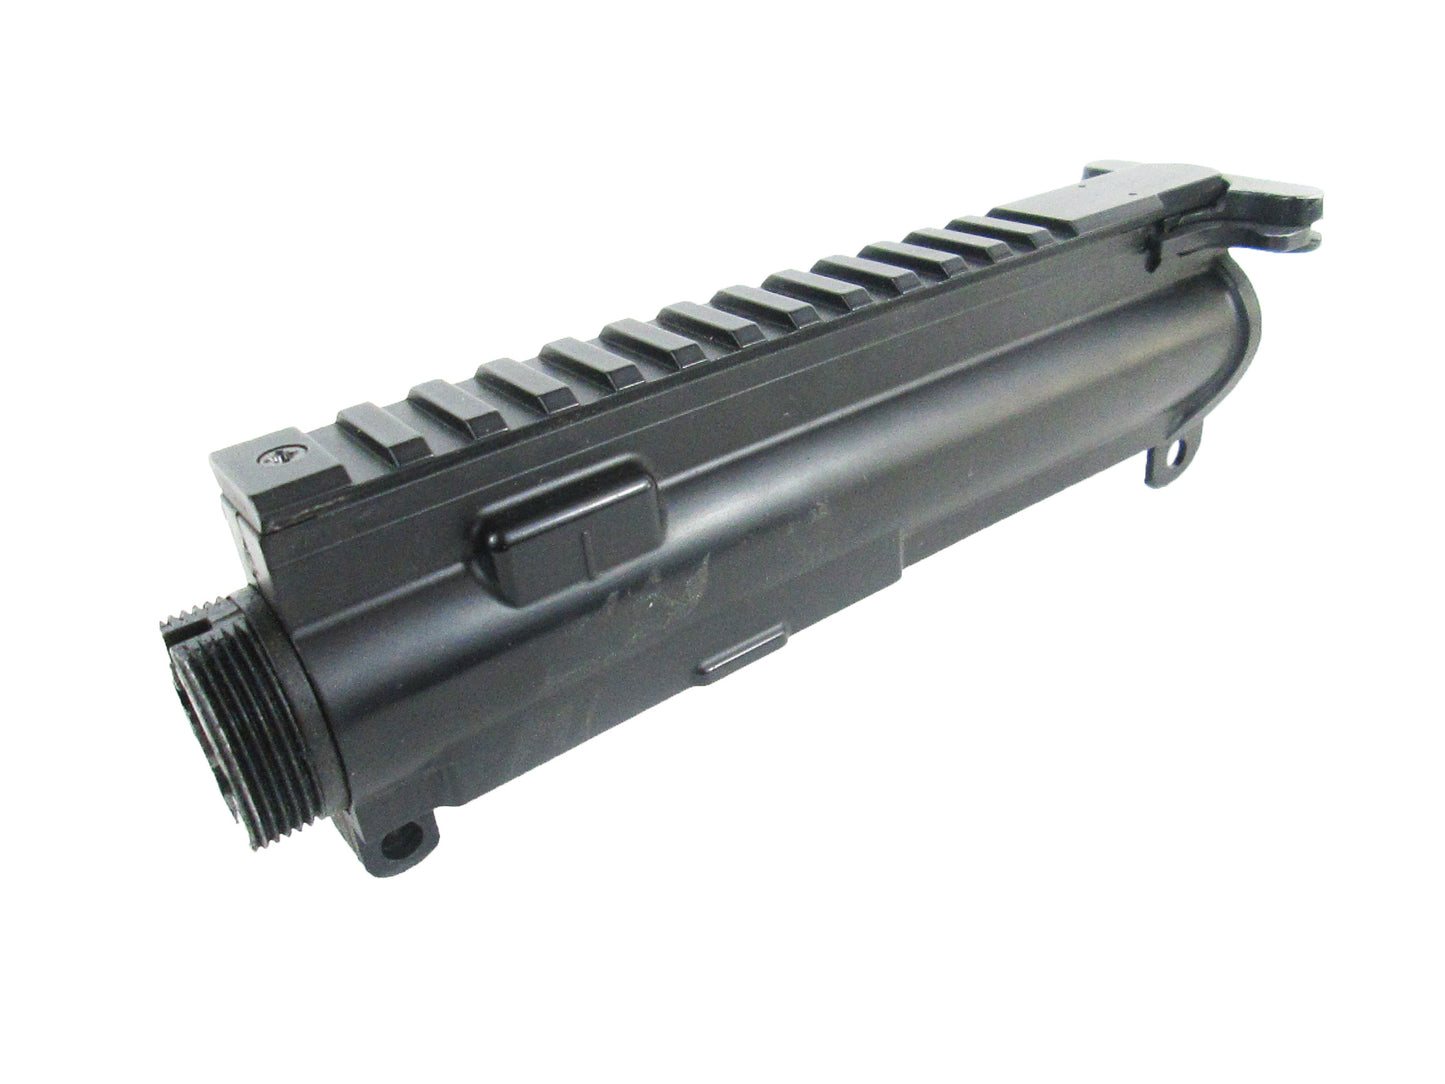 M4 M16 Complete Upper Receiver - ABS